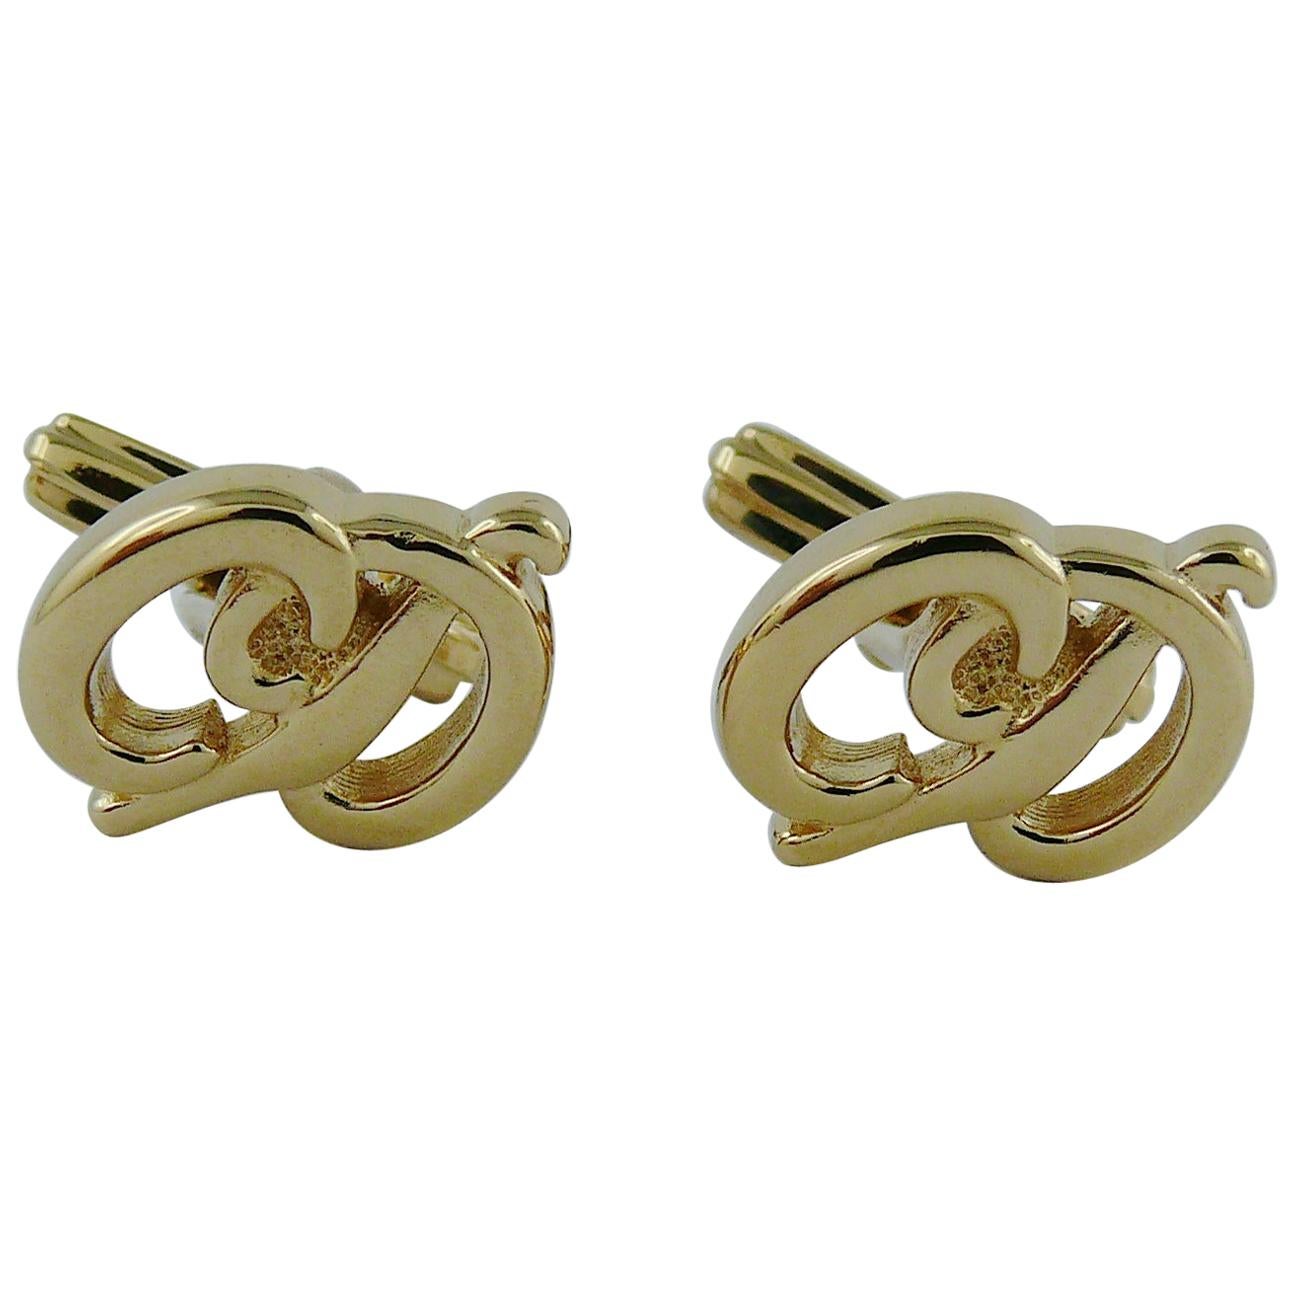 Vintage Christian Dior Banned Cufflinks in gold and zirconia 